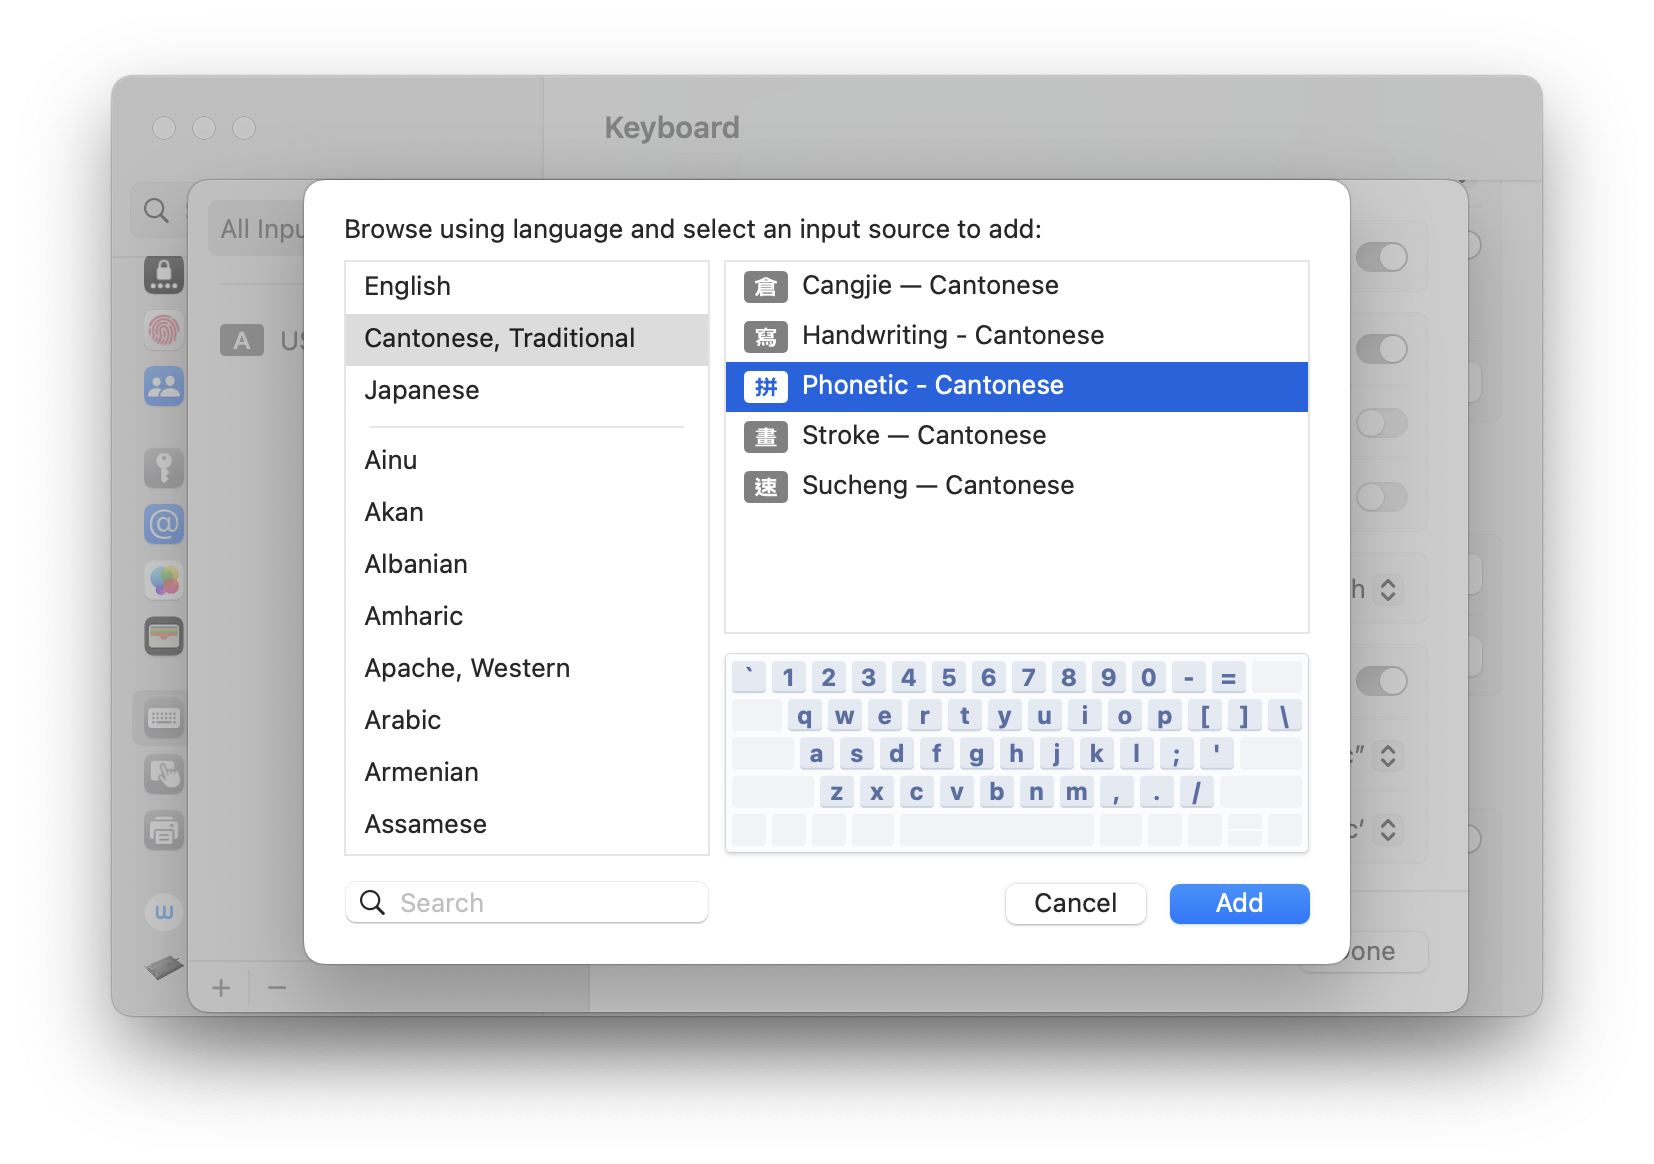 Mac system keyboard settings on 'Cantonese, Traditional' Input Sources with 'Phonetic - Cantonese' selected